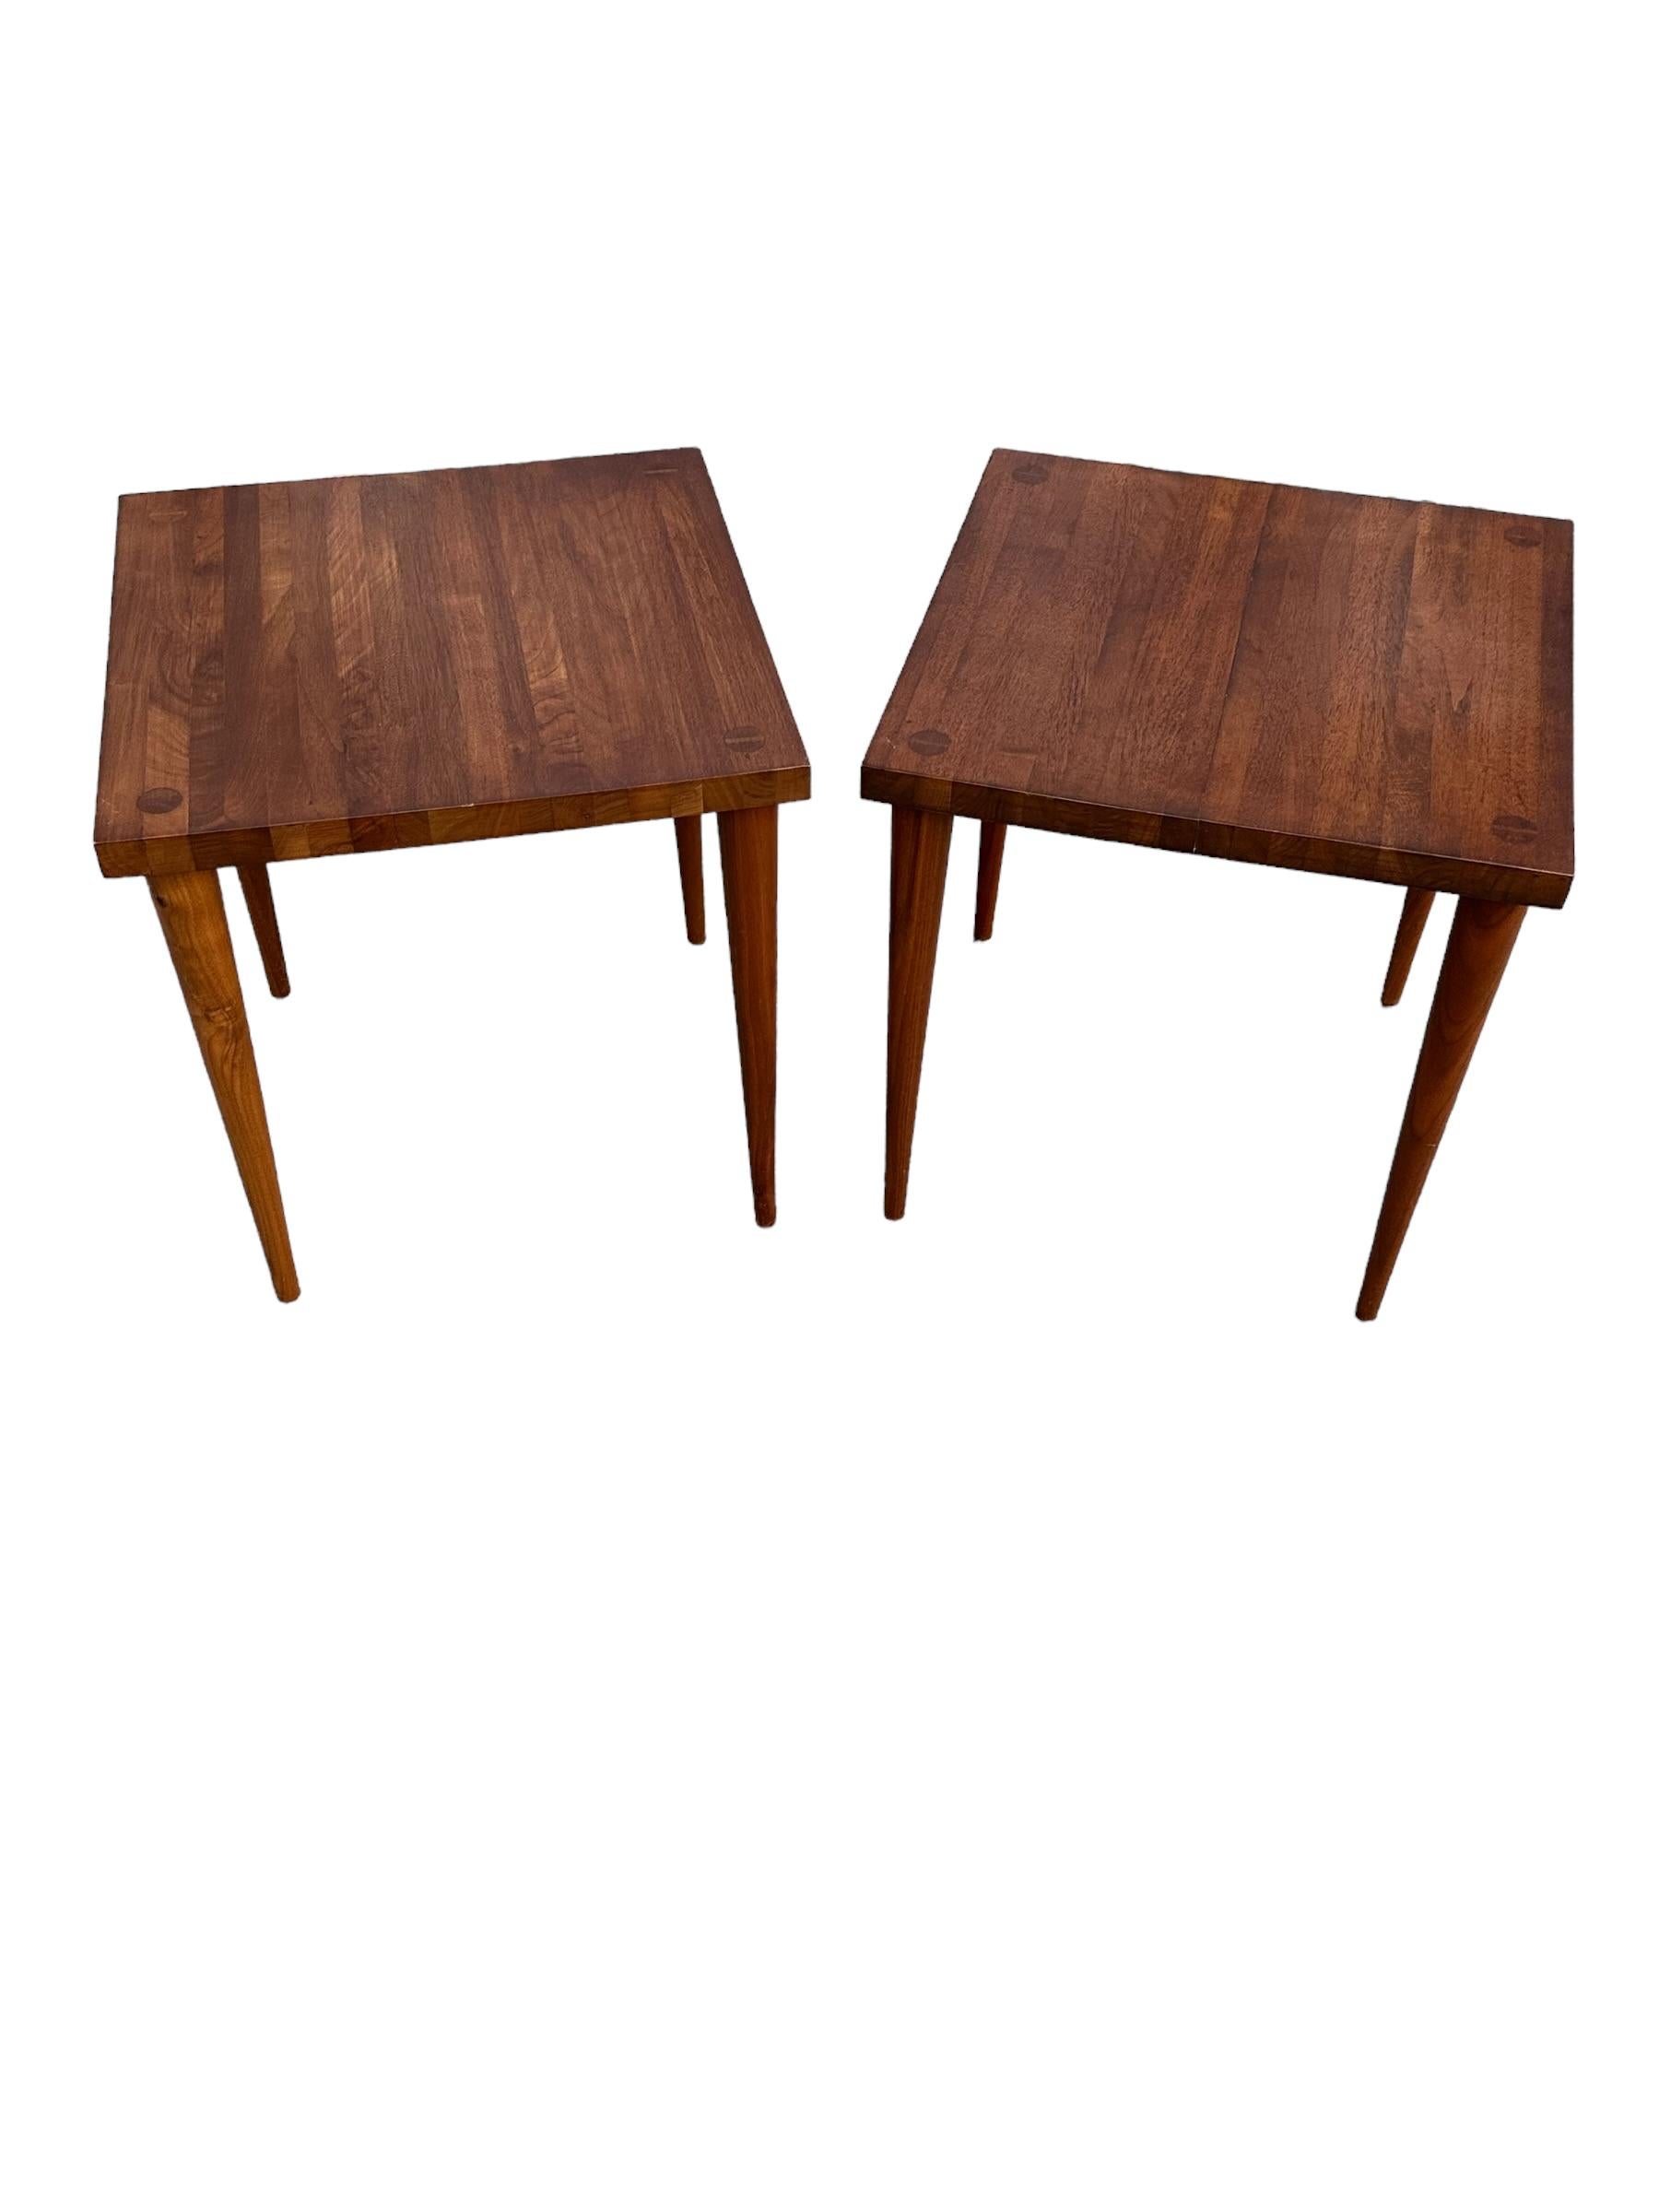 Classic modernist simplicity and elegance in this pair of solid wooden side tables. Designed by Mel Smilow and executed in American Walnut. Butcher blocks style tops without chunky silhouette. Tapered legs with visible joinery are honest and